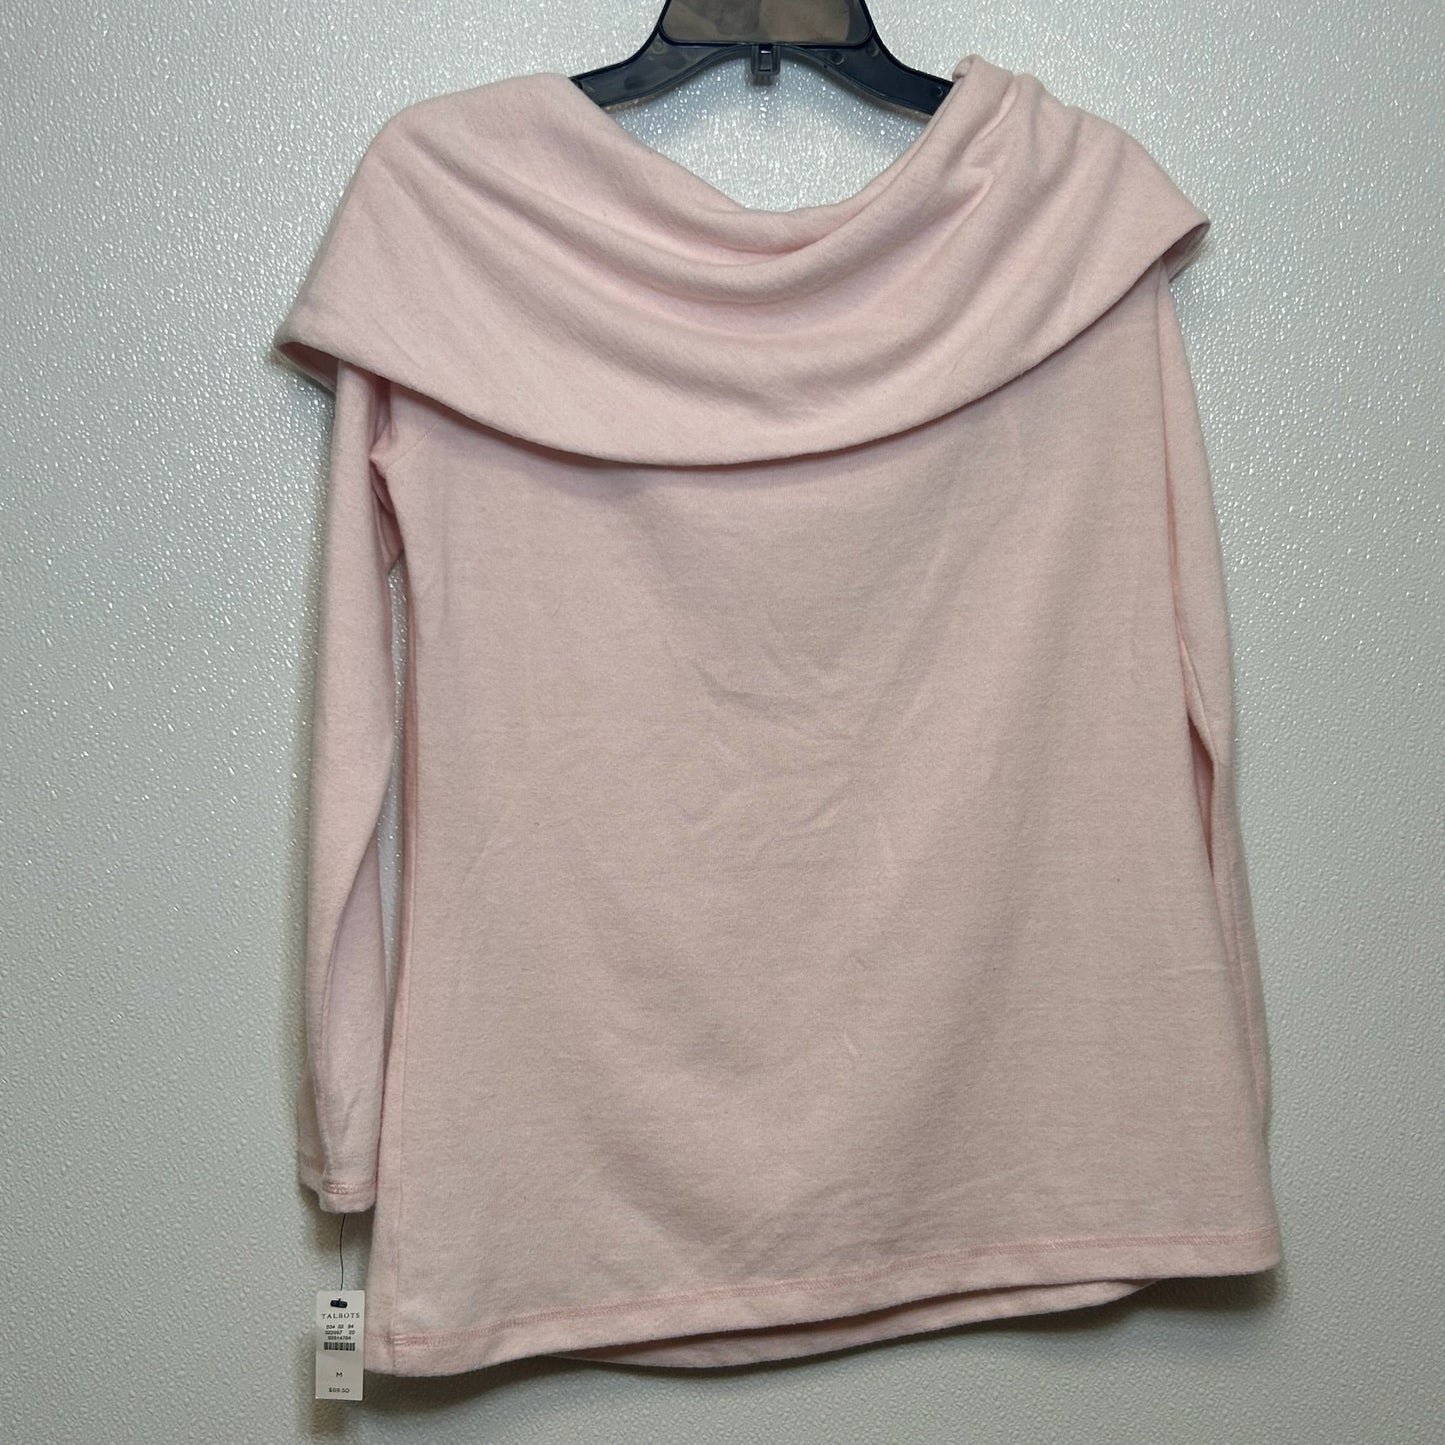 Pink Top Long Sleeve Talbots O, Size M